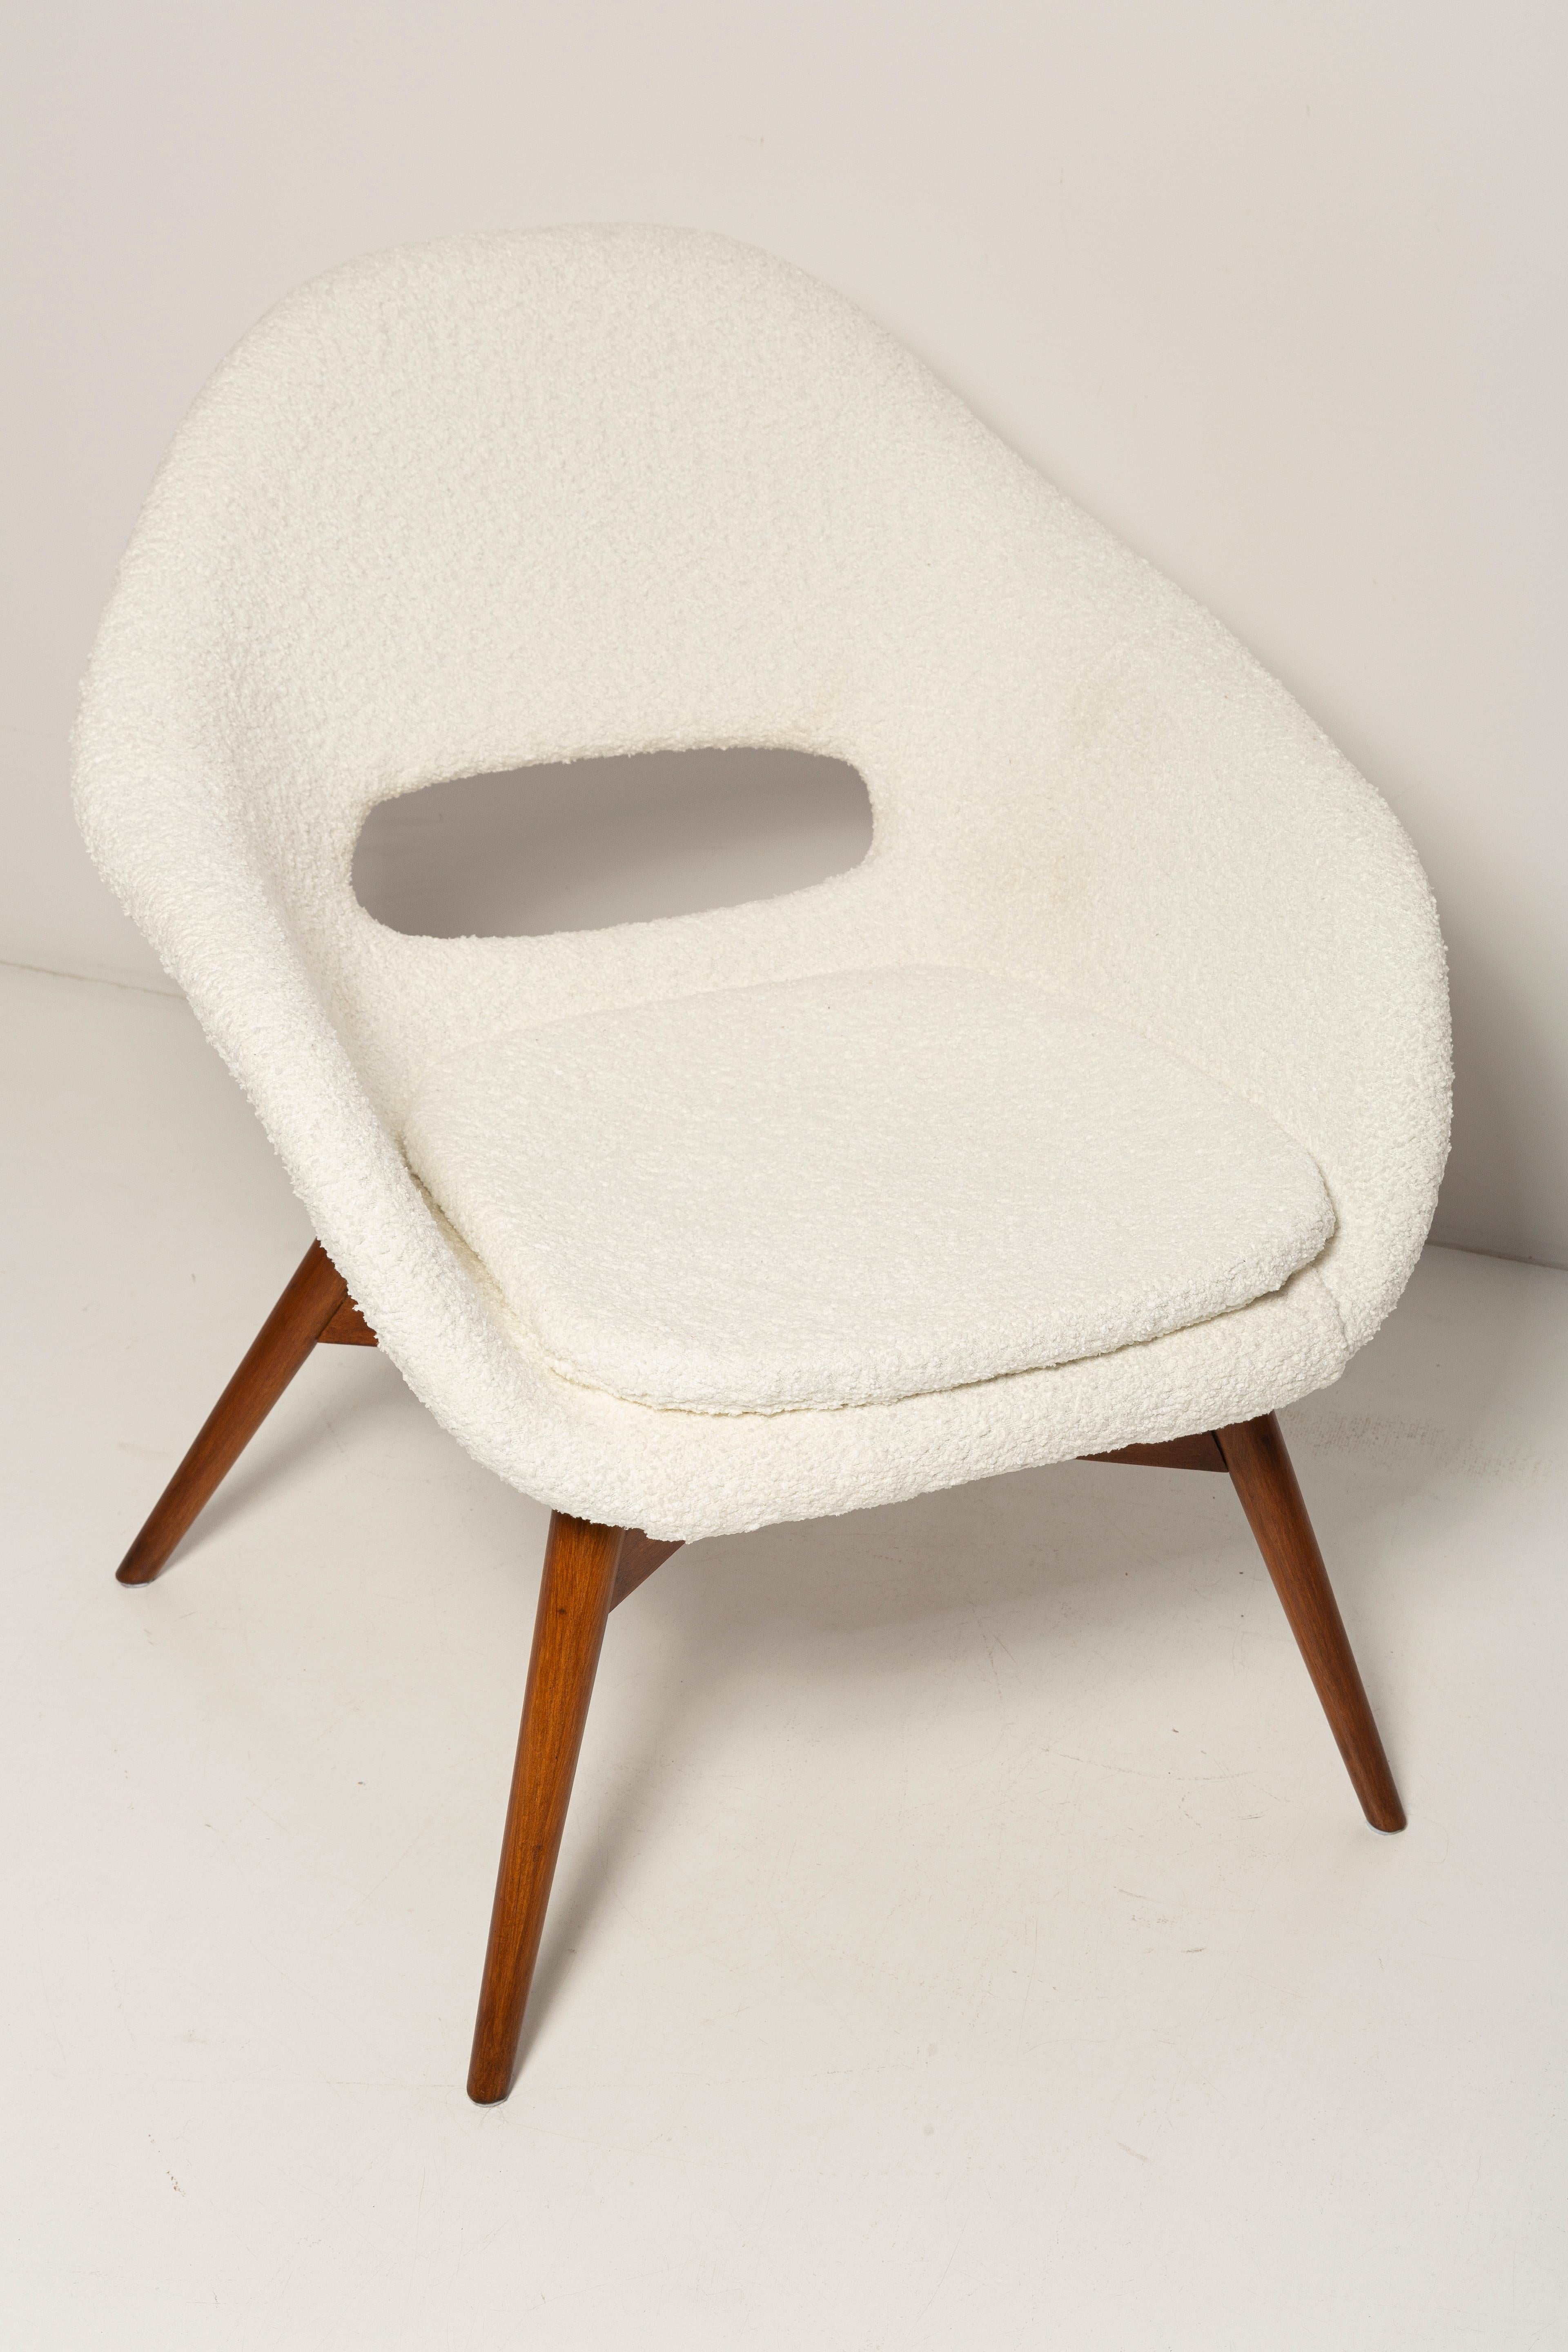 Hand-Crafted Mid-Century White Boucle Shell Chair, Miroslav Navratil, Czechoslovakia, 1960s For Sale